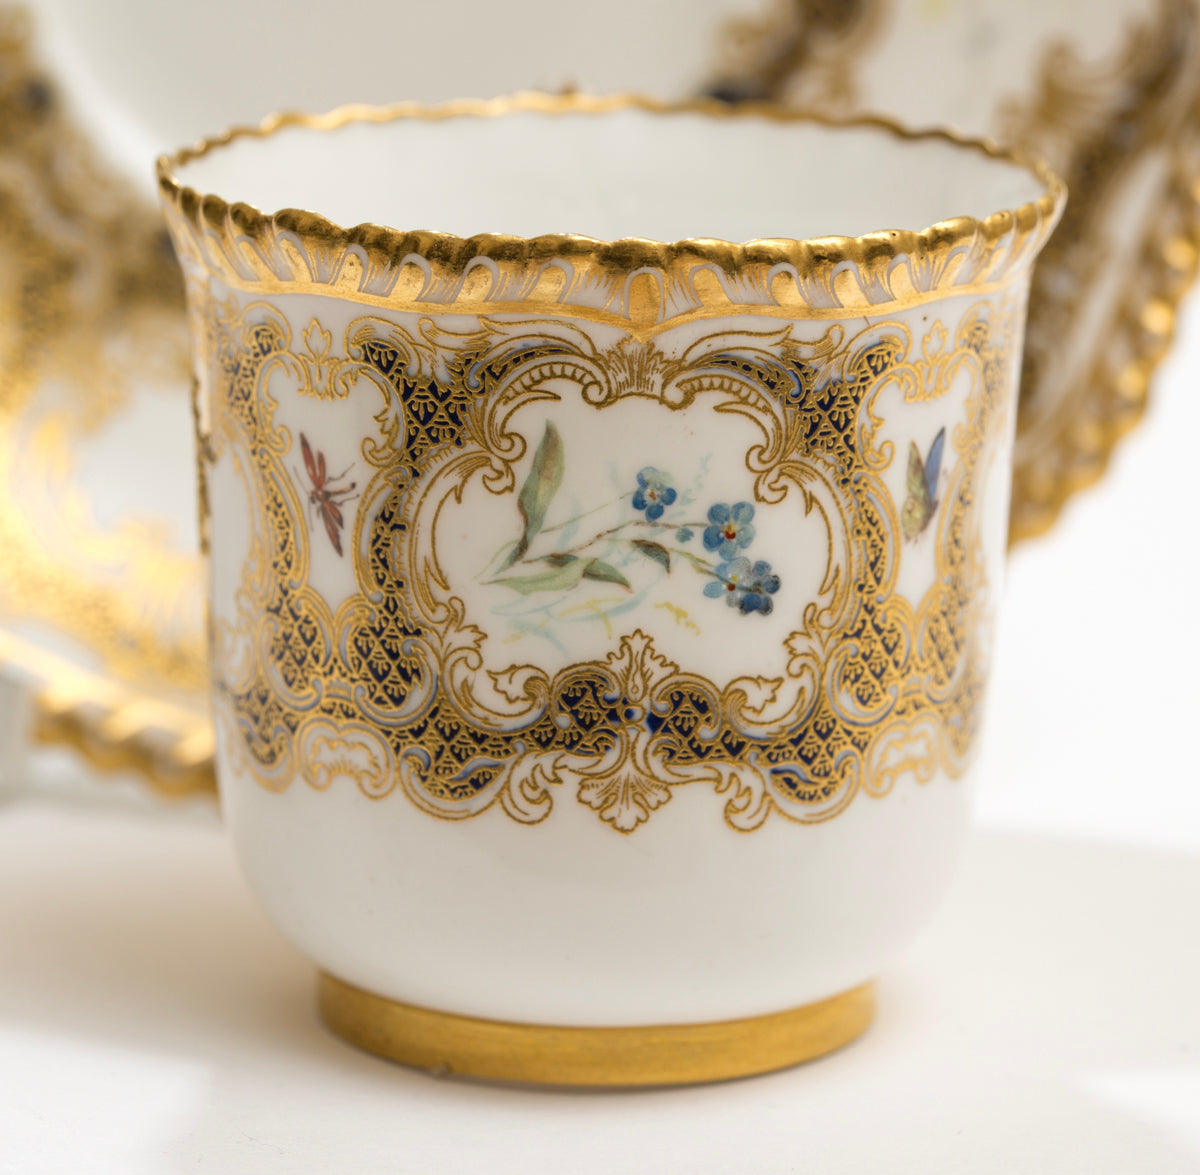 Antique Royal Worcester China Armorial Teacup Trio Walker Family Crest (3168)